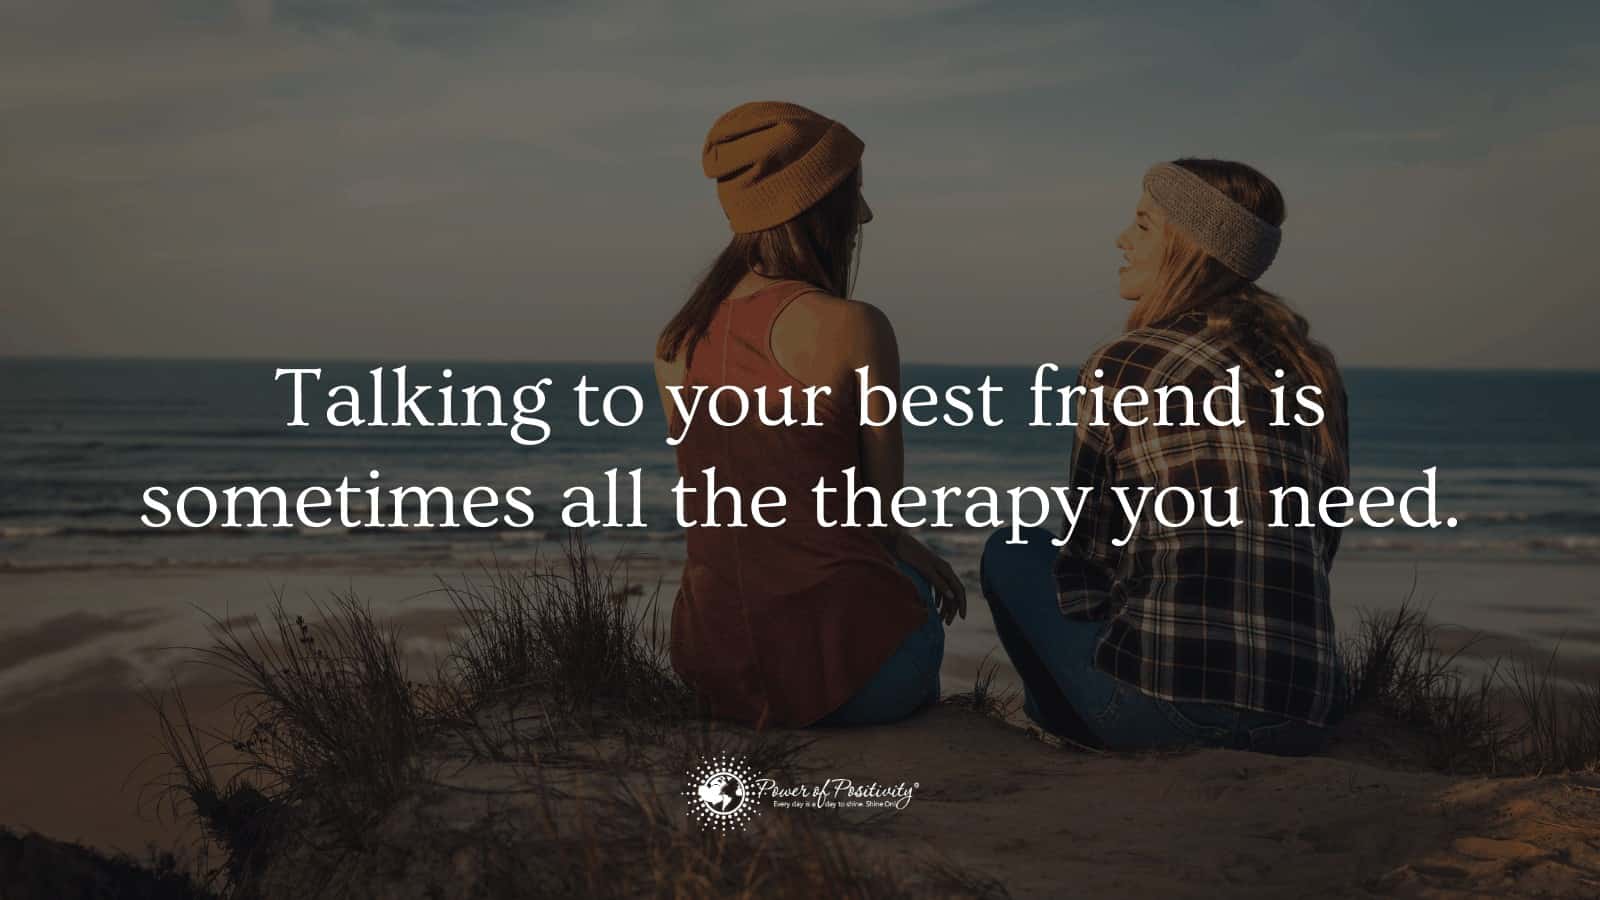 15 Quotes on Friends to Remember When You Feel Lonely